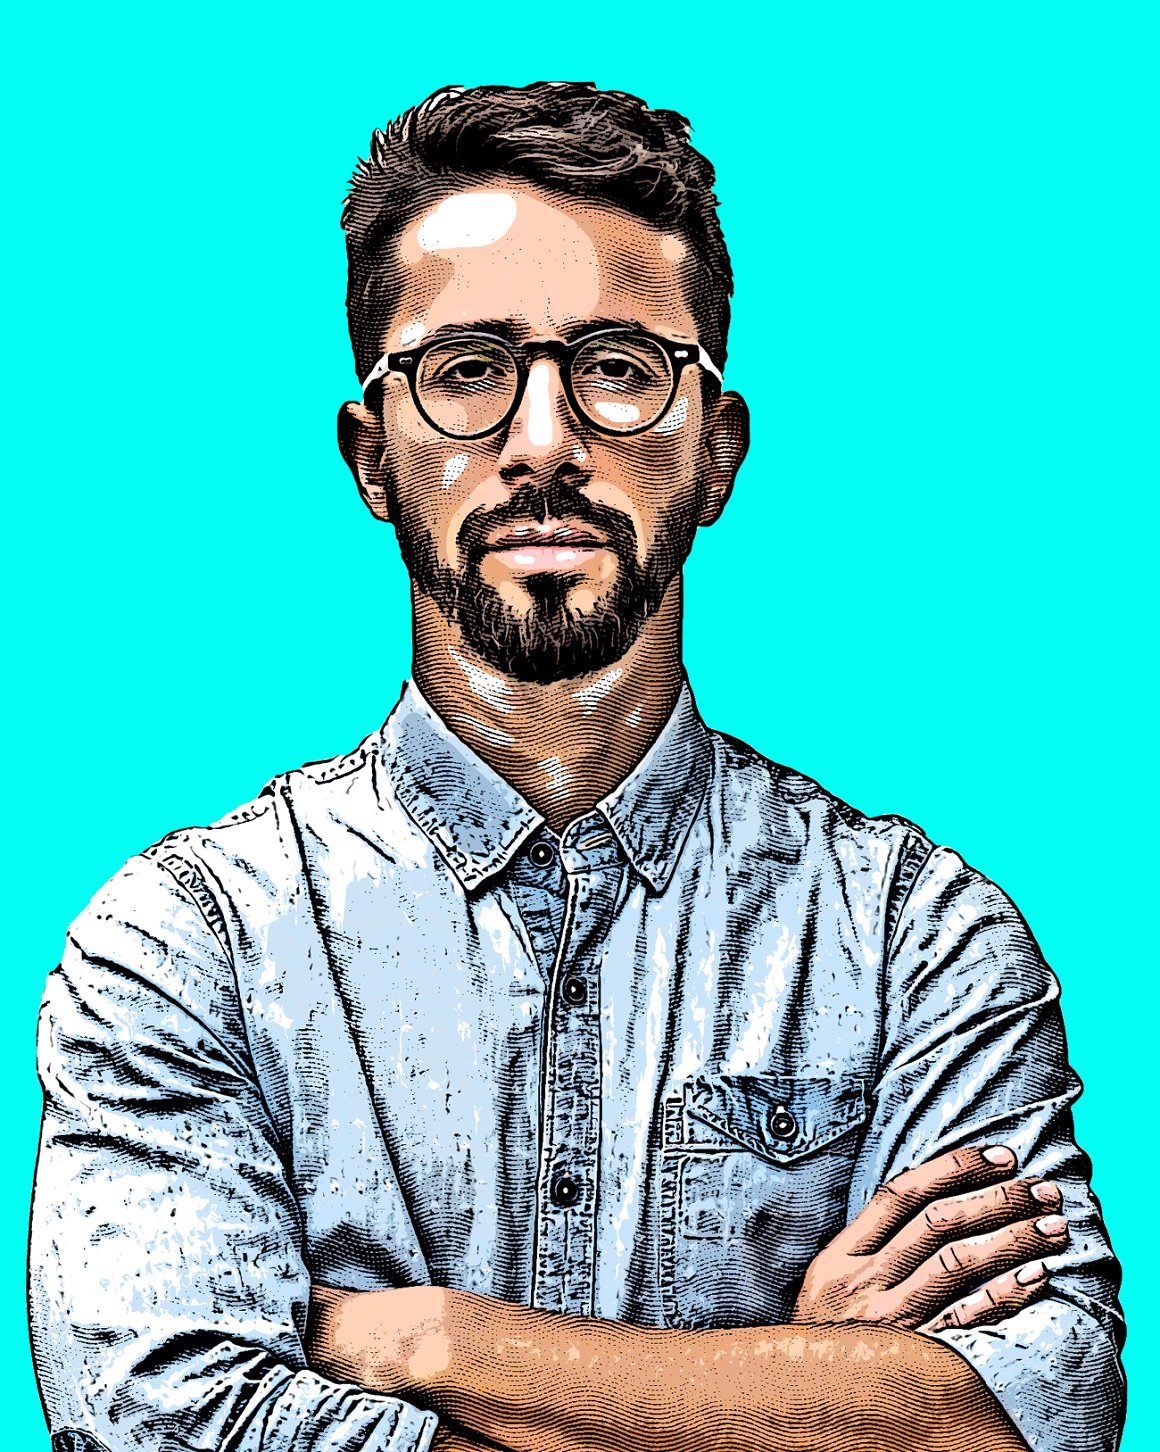 A man in glasses on a turquoise background.